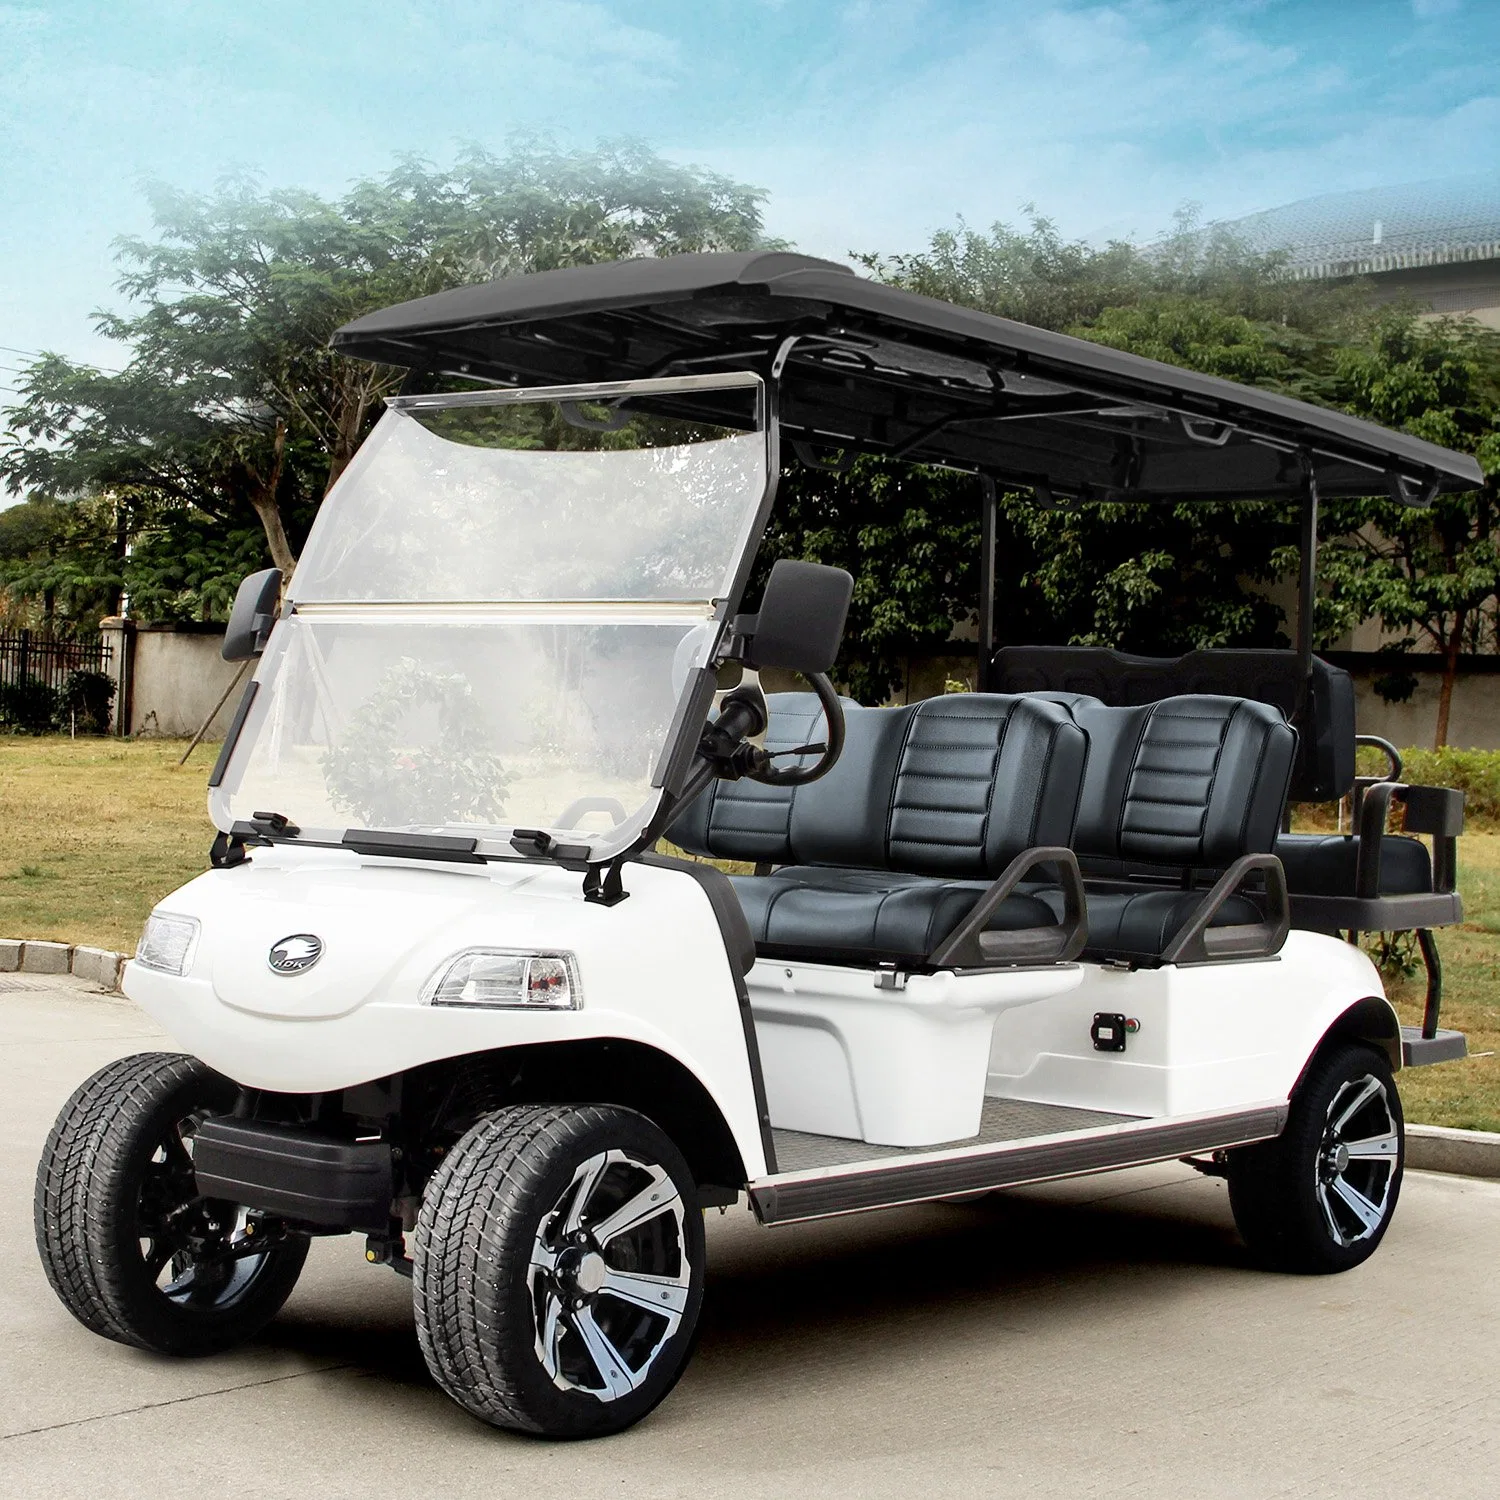 6 Seater High Power Flip Flop Seats Electric Golf Car with Lithium Battery